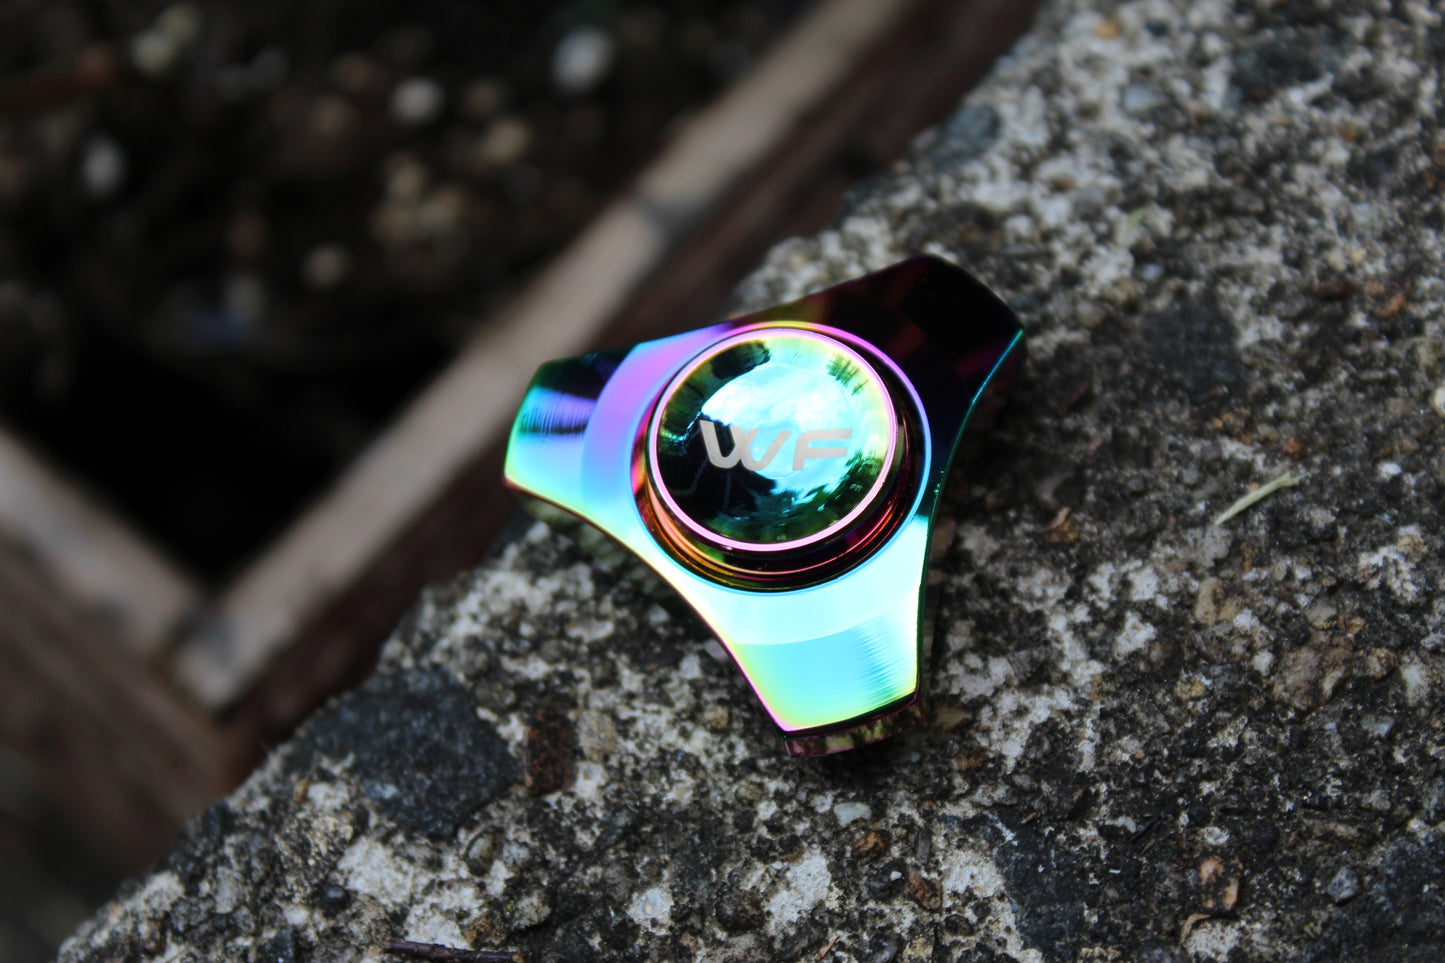 WeFidget's Original Trinity Fidget Spinner, 4-5 Minute Spin Time, Portable, Discrete, Silent, Smooth (Rainbow or Black Available)